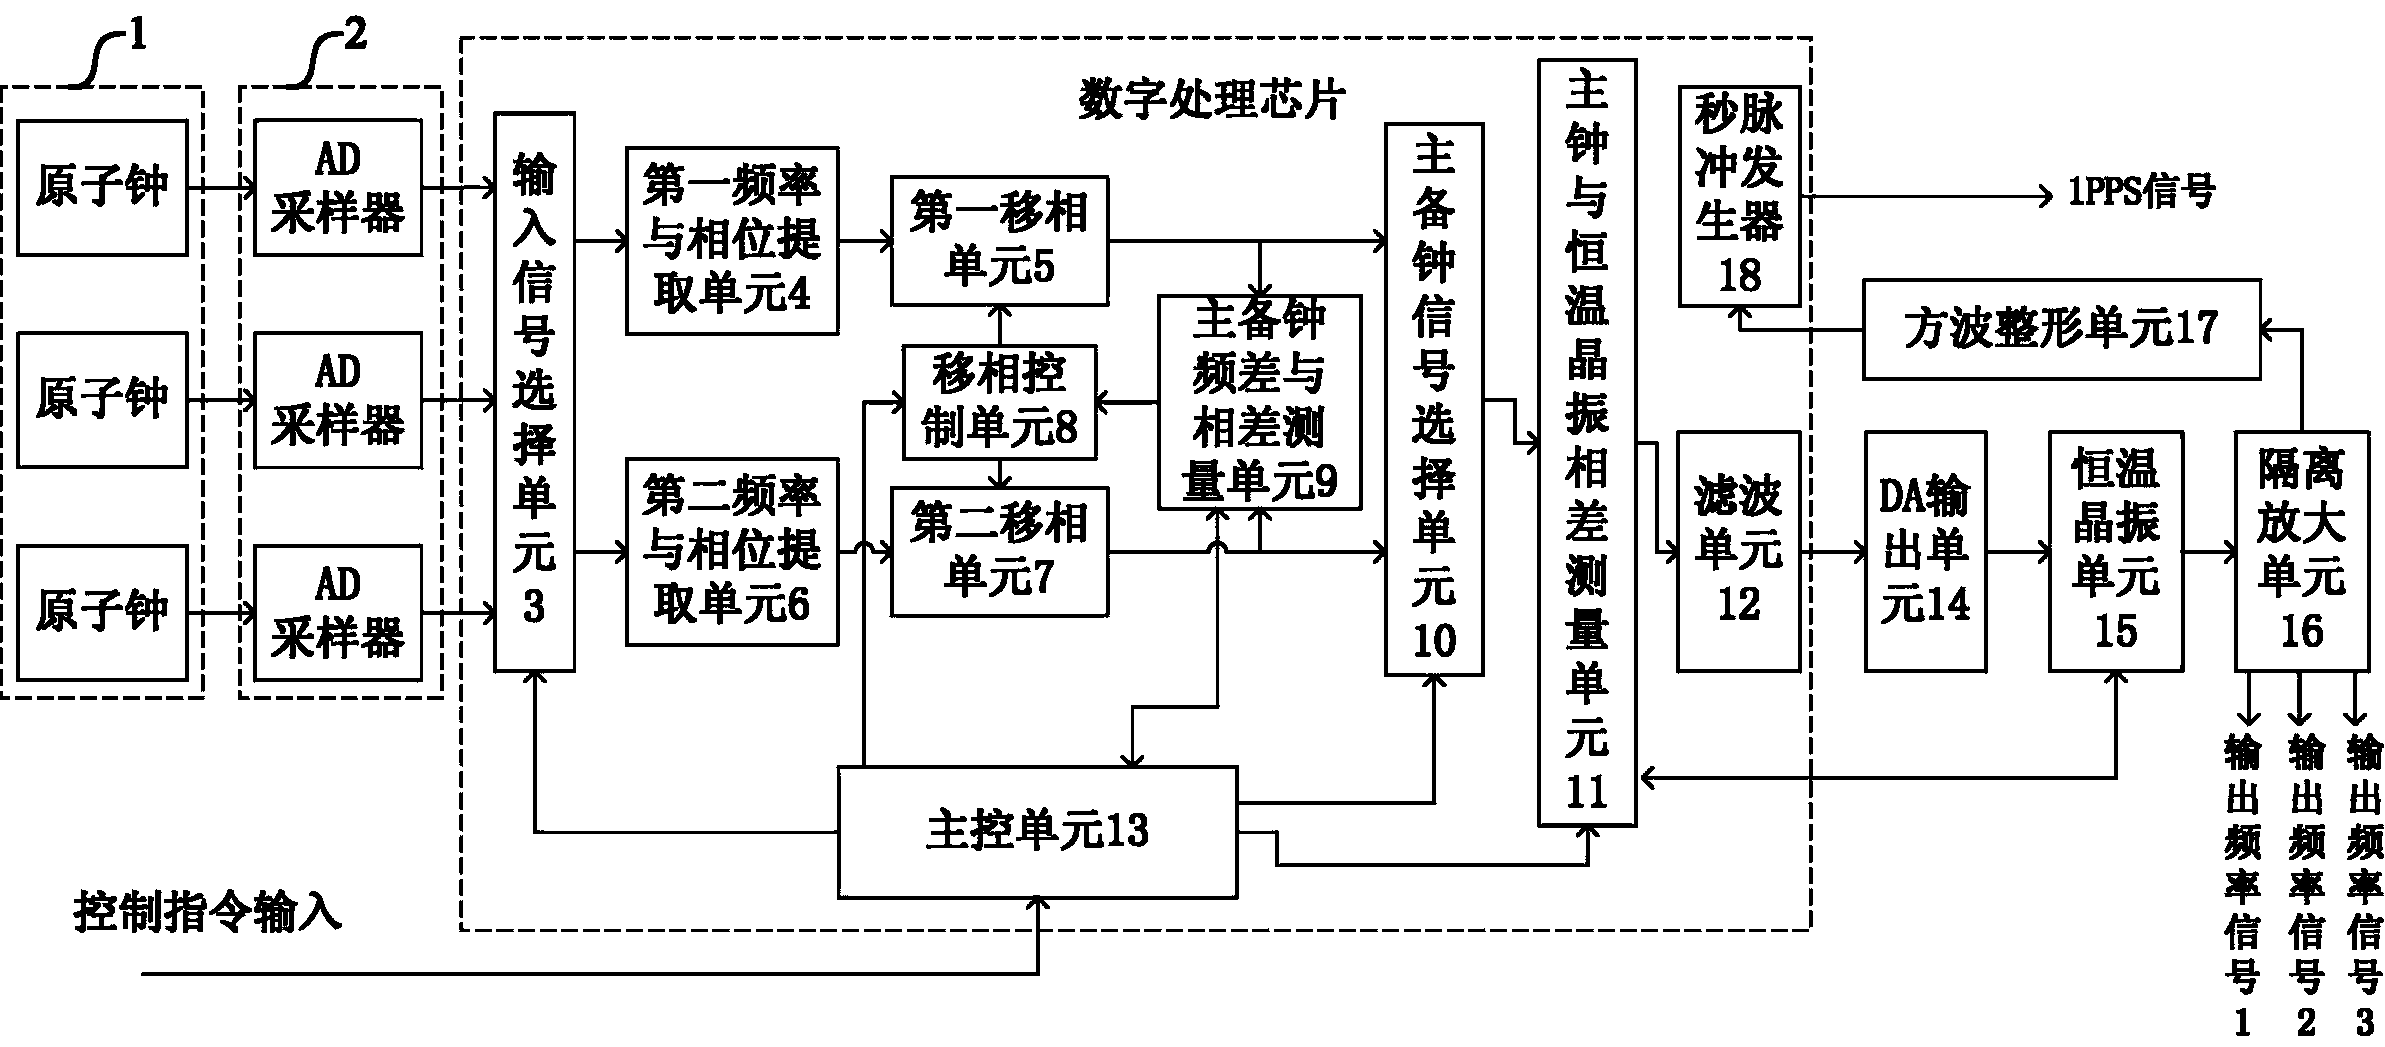 Main and standby satellite clock time frequency signal seamless switching device and method